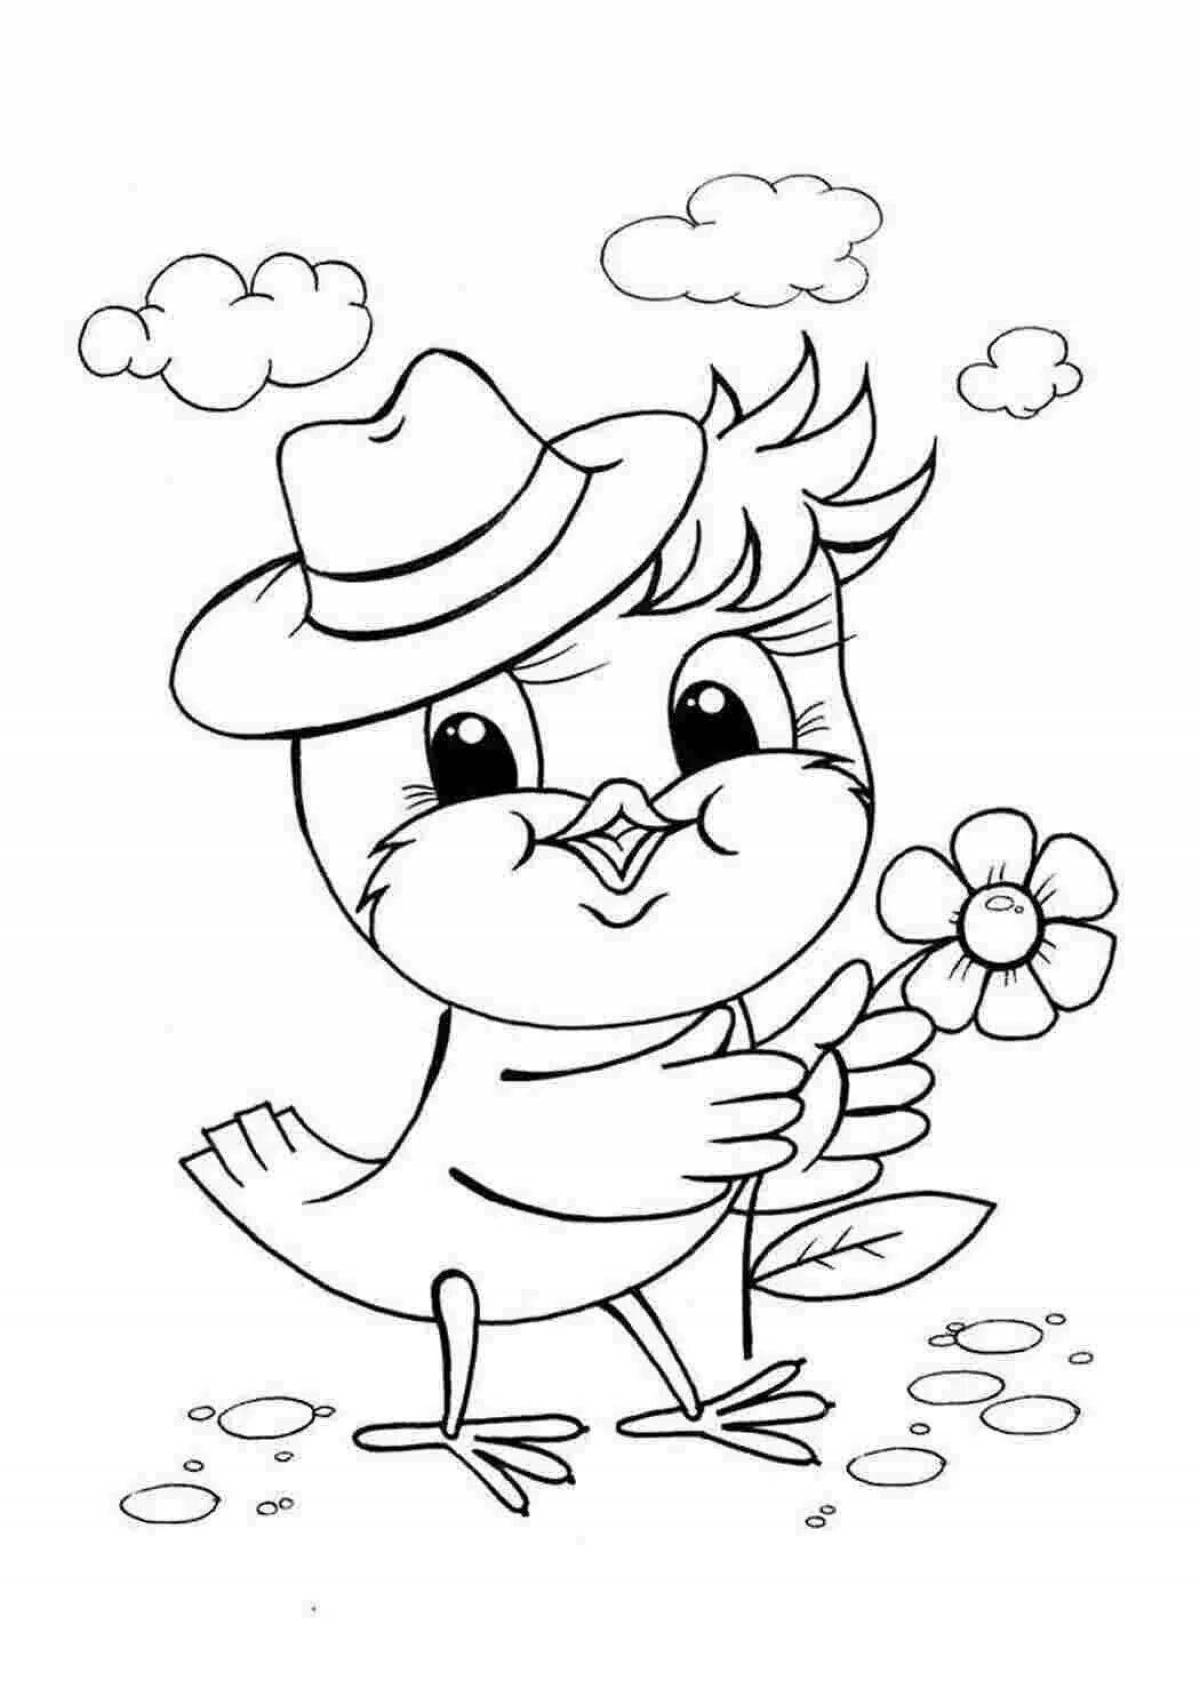 Fantastic sparrow coloring book for 3 year olds